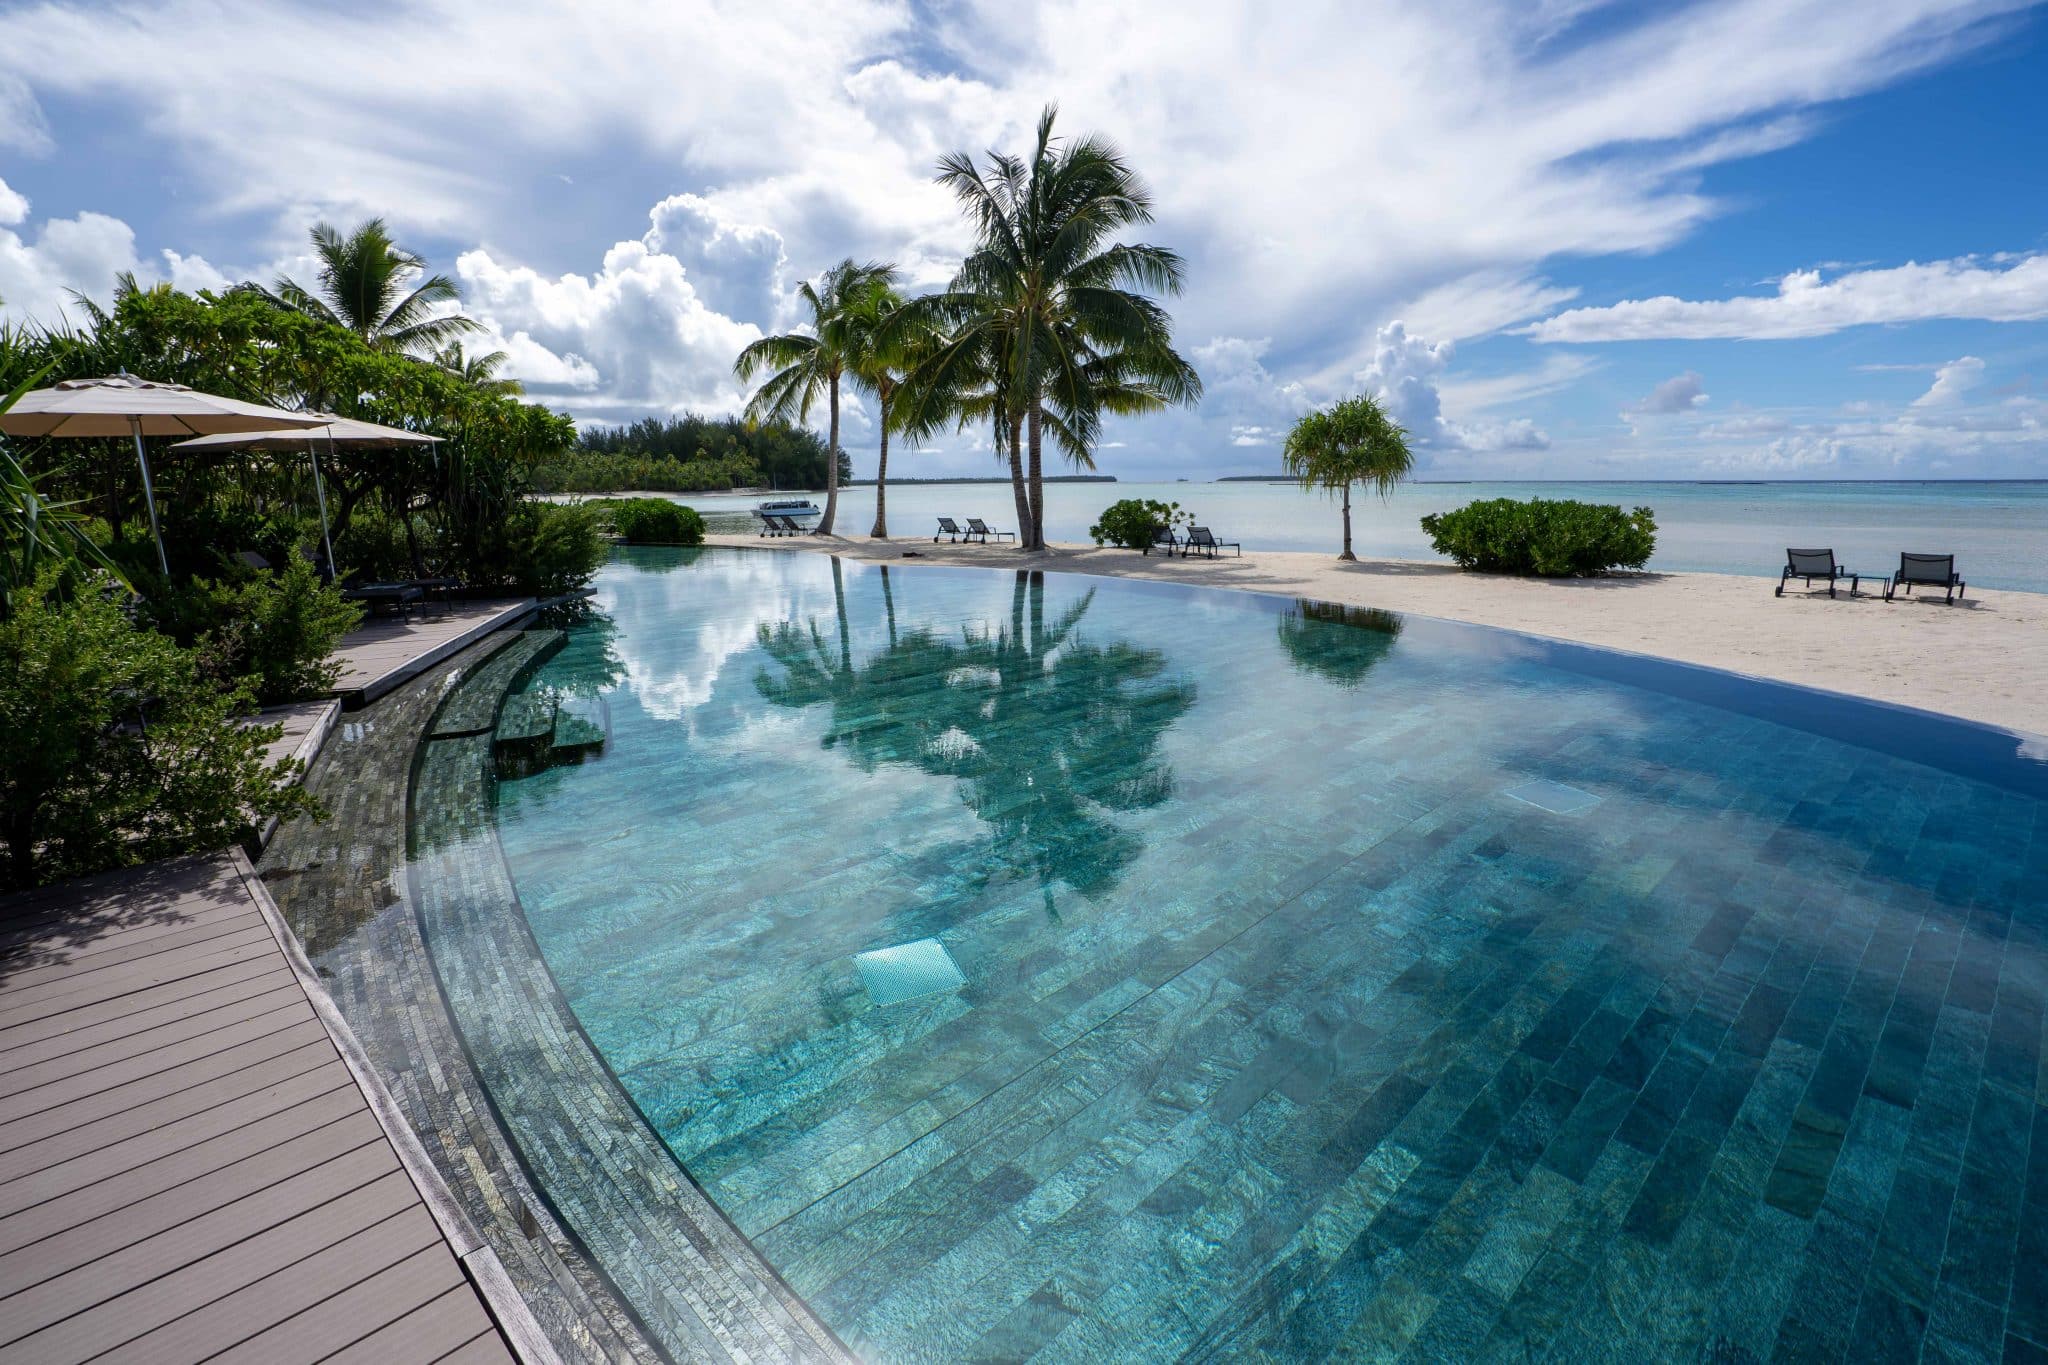 The Brando poolside view overlooking the pristine, turquoise waters and breathtaking archipelagos of the vast South Pacific.